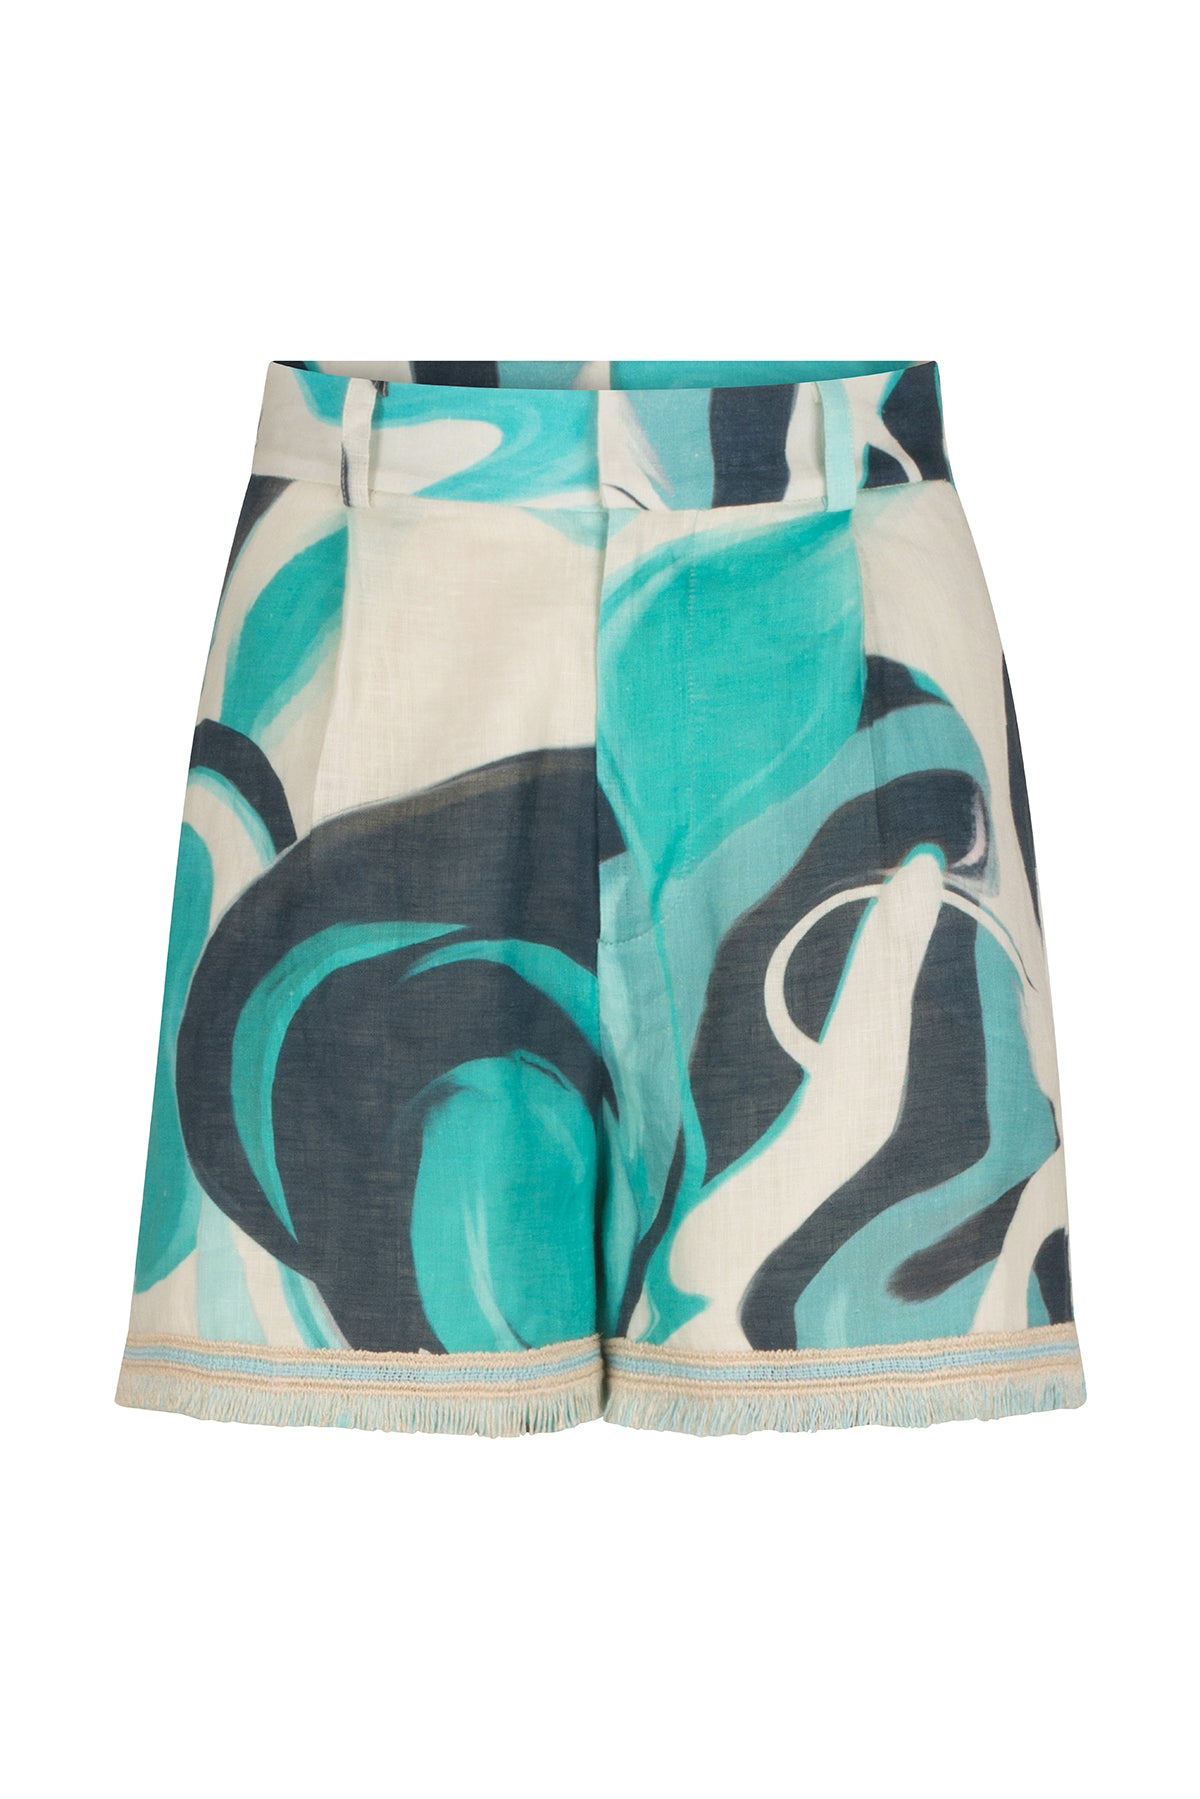 Arnit Short Turquoise Marble with a blue and white abstract print.